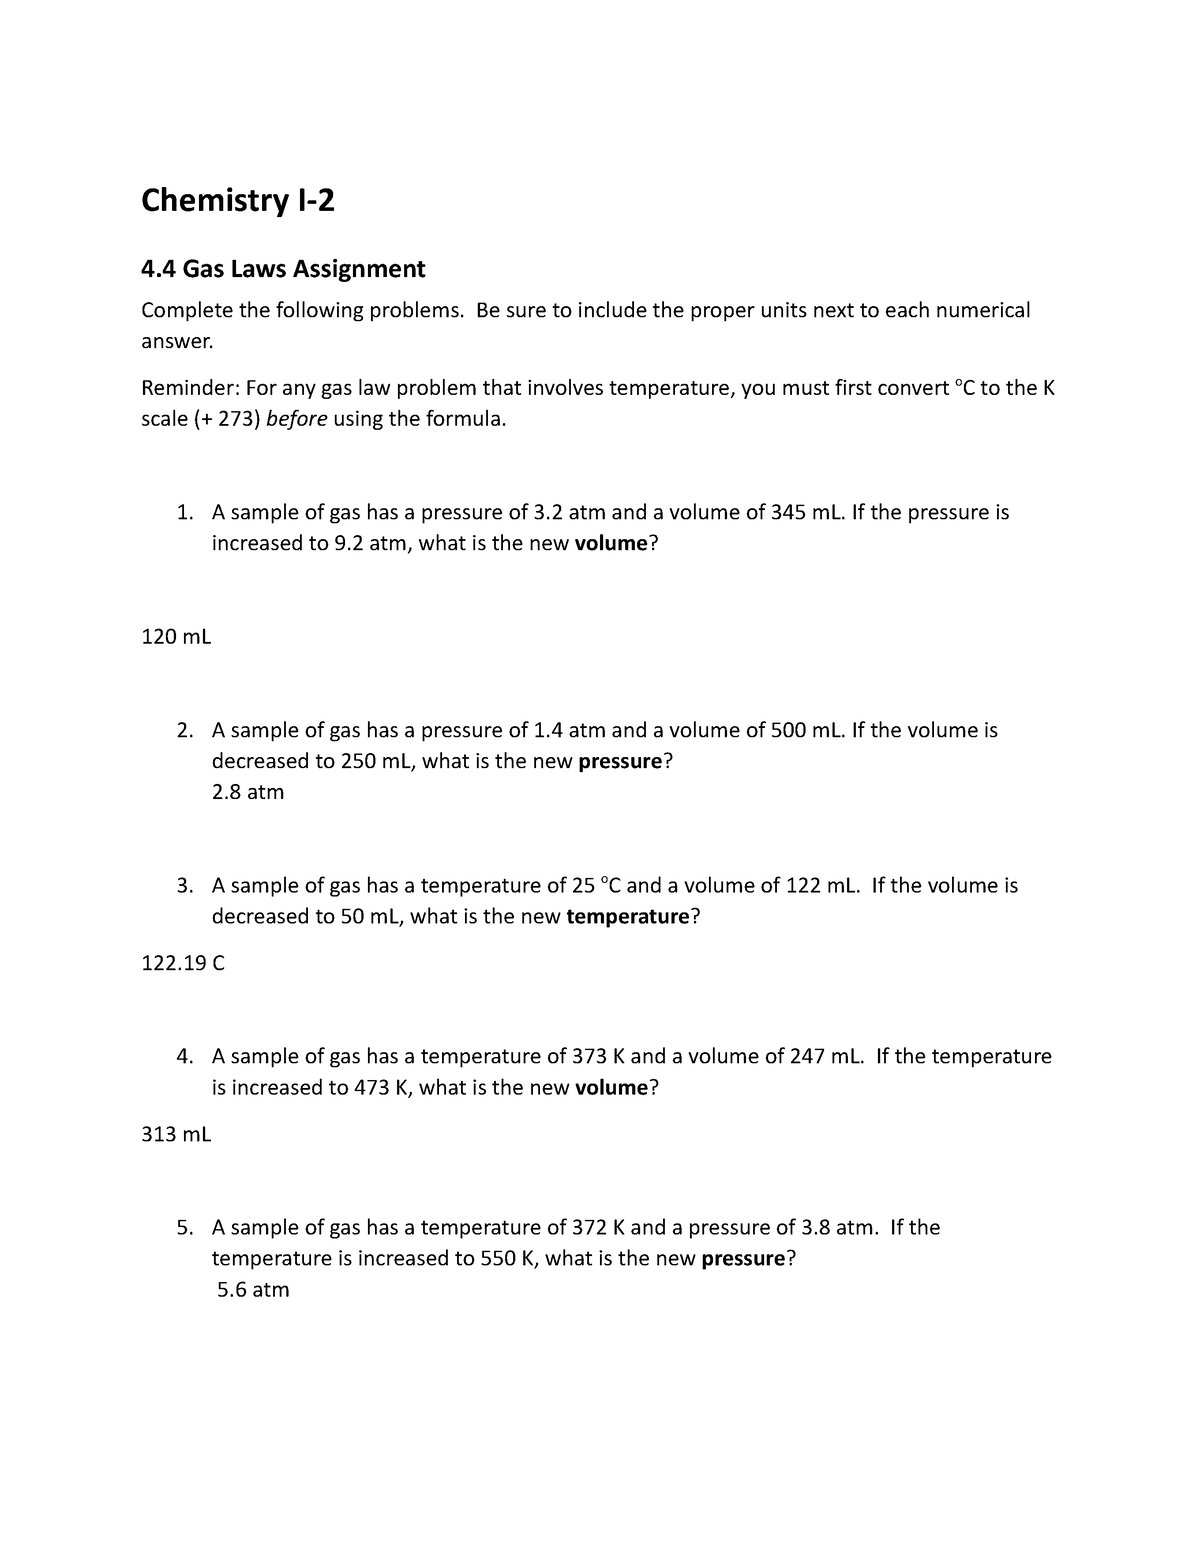 4.4 gas laws assignment